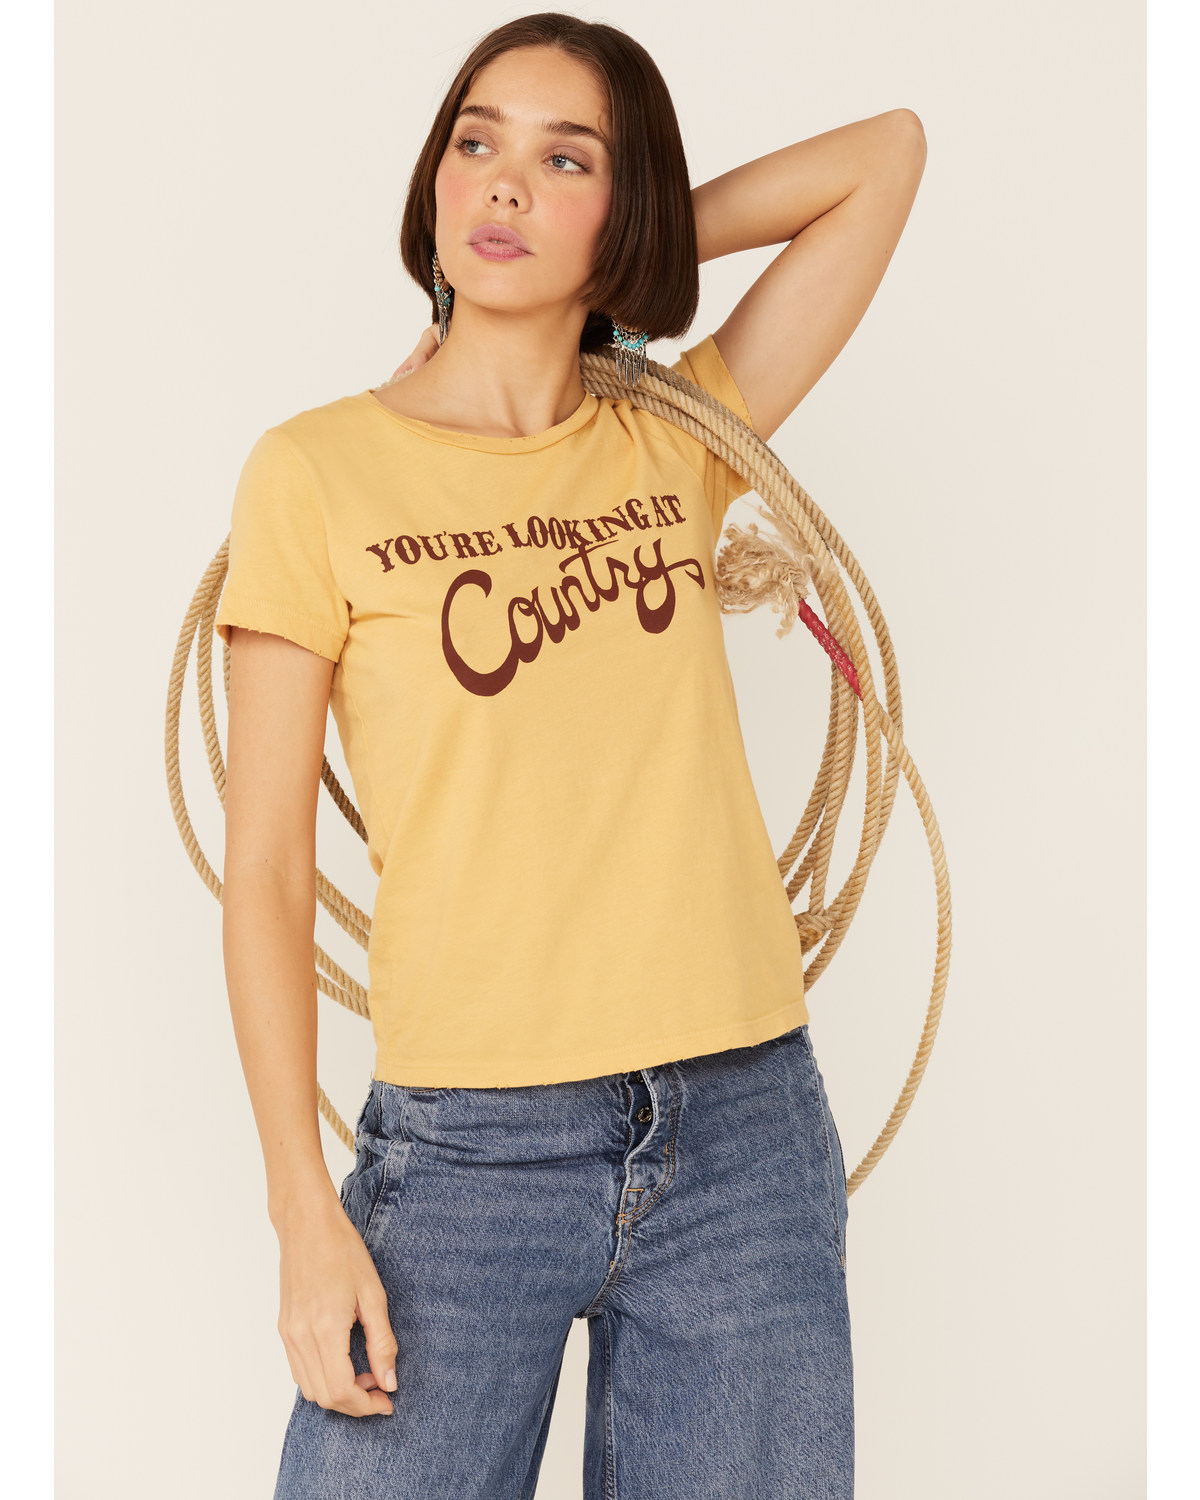 Bandit Women's Looking At Country Graphic Tee